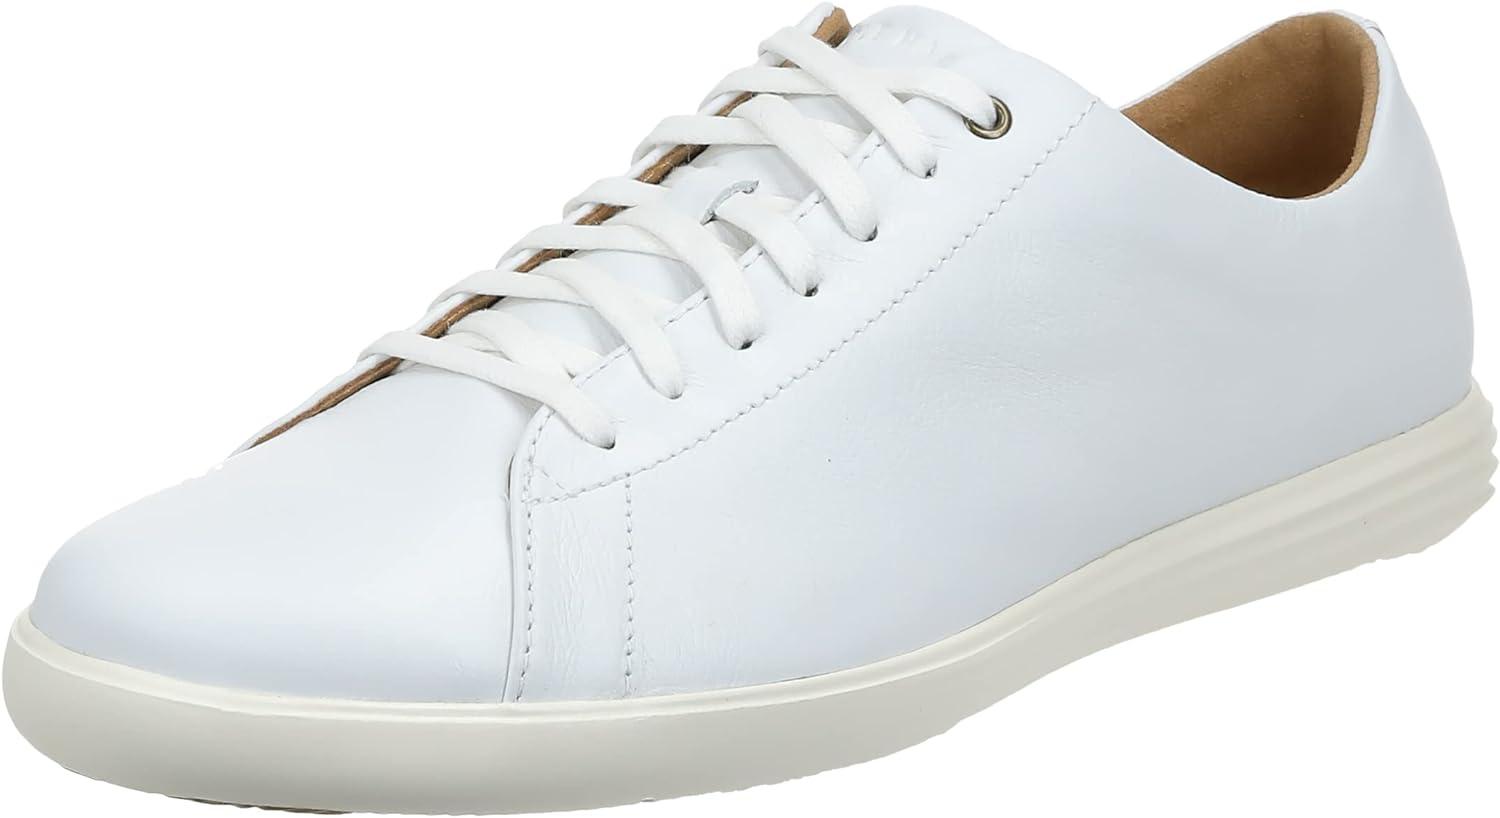 Cole Haan Mens Grand Crosscourt Sneaker for $54.80 Shipped